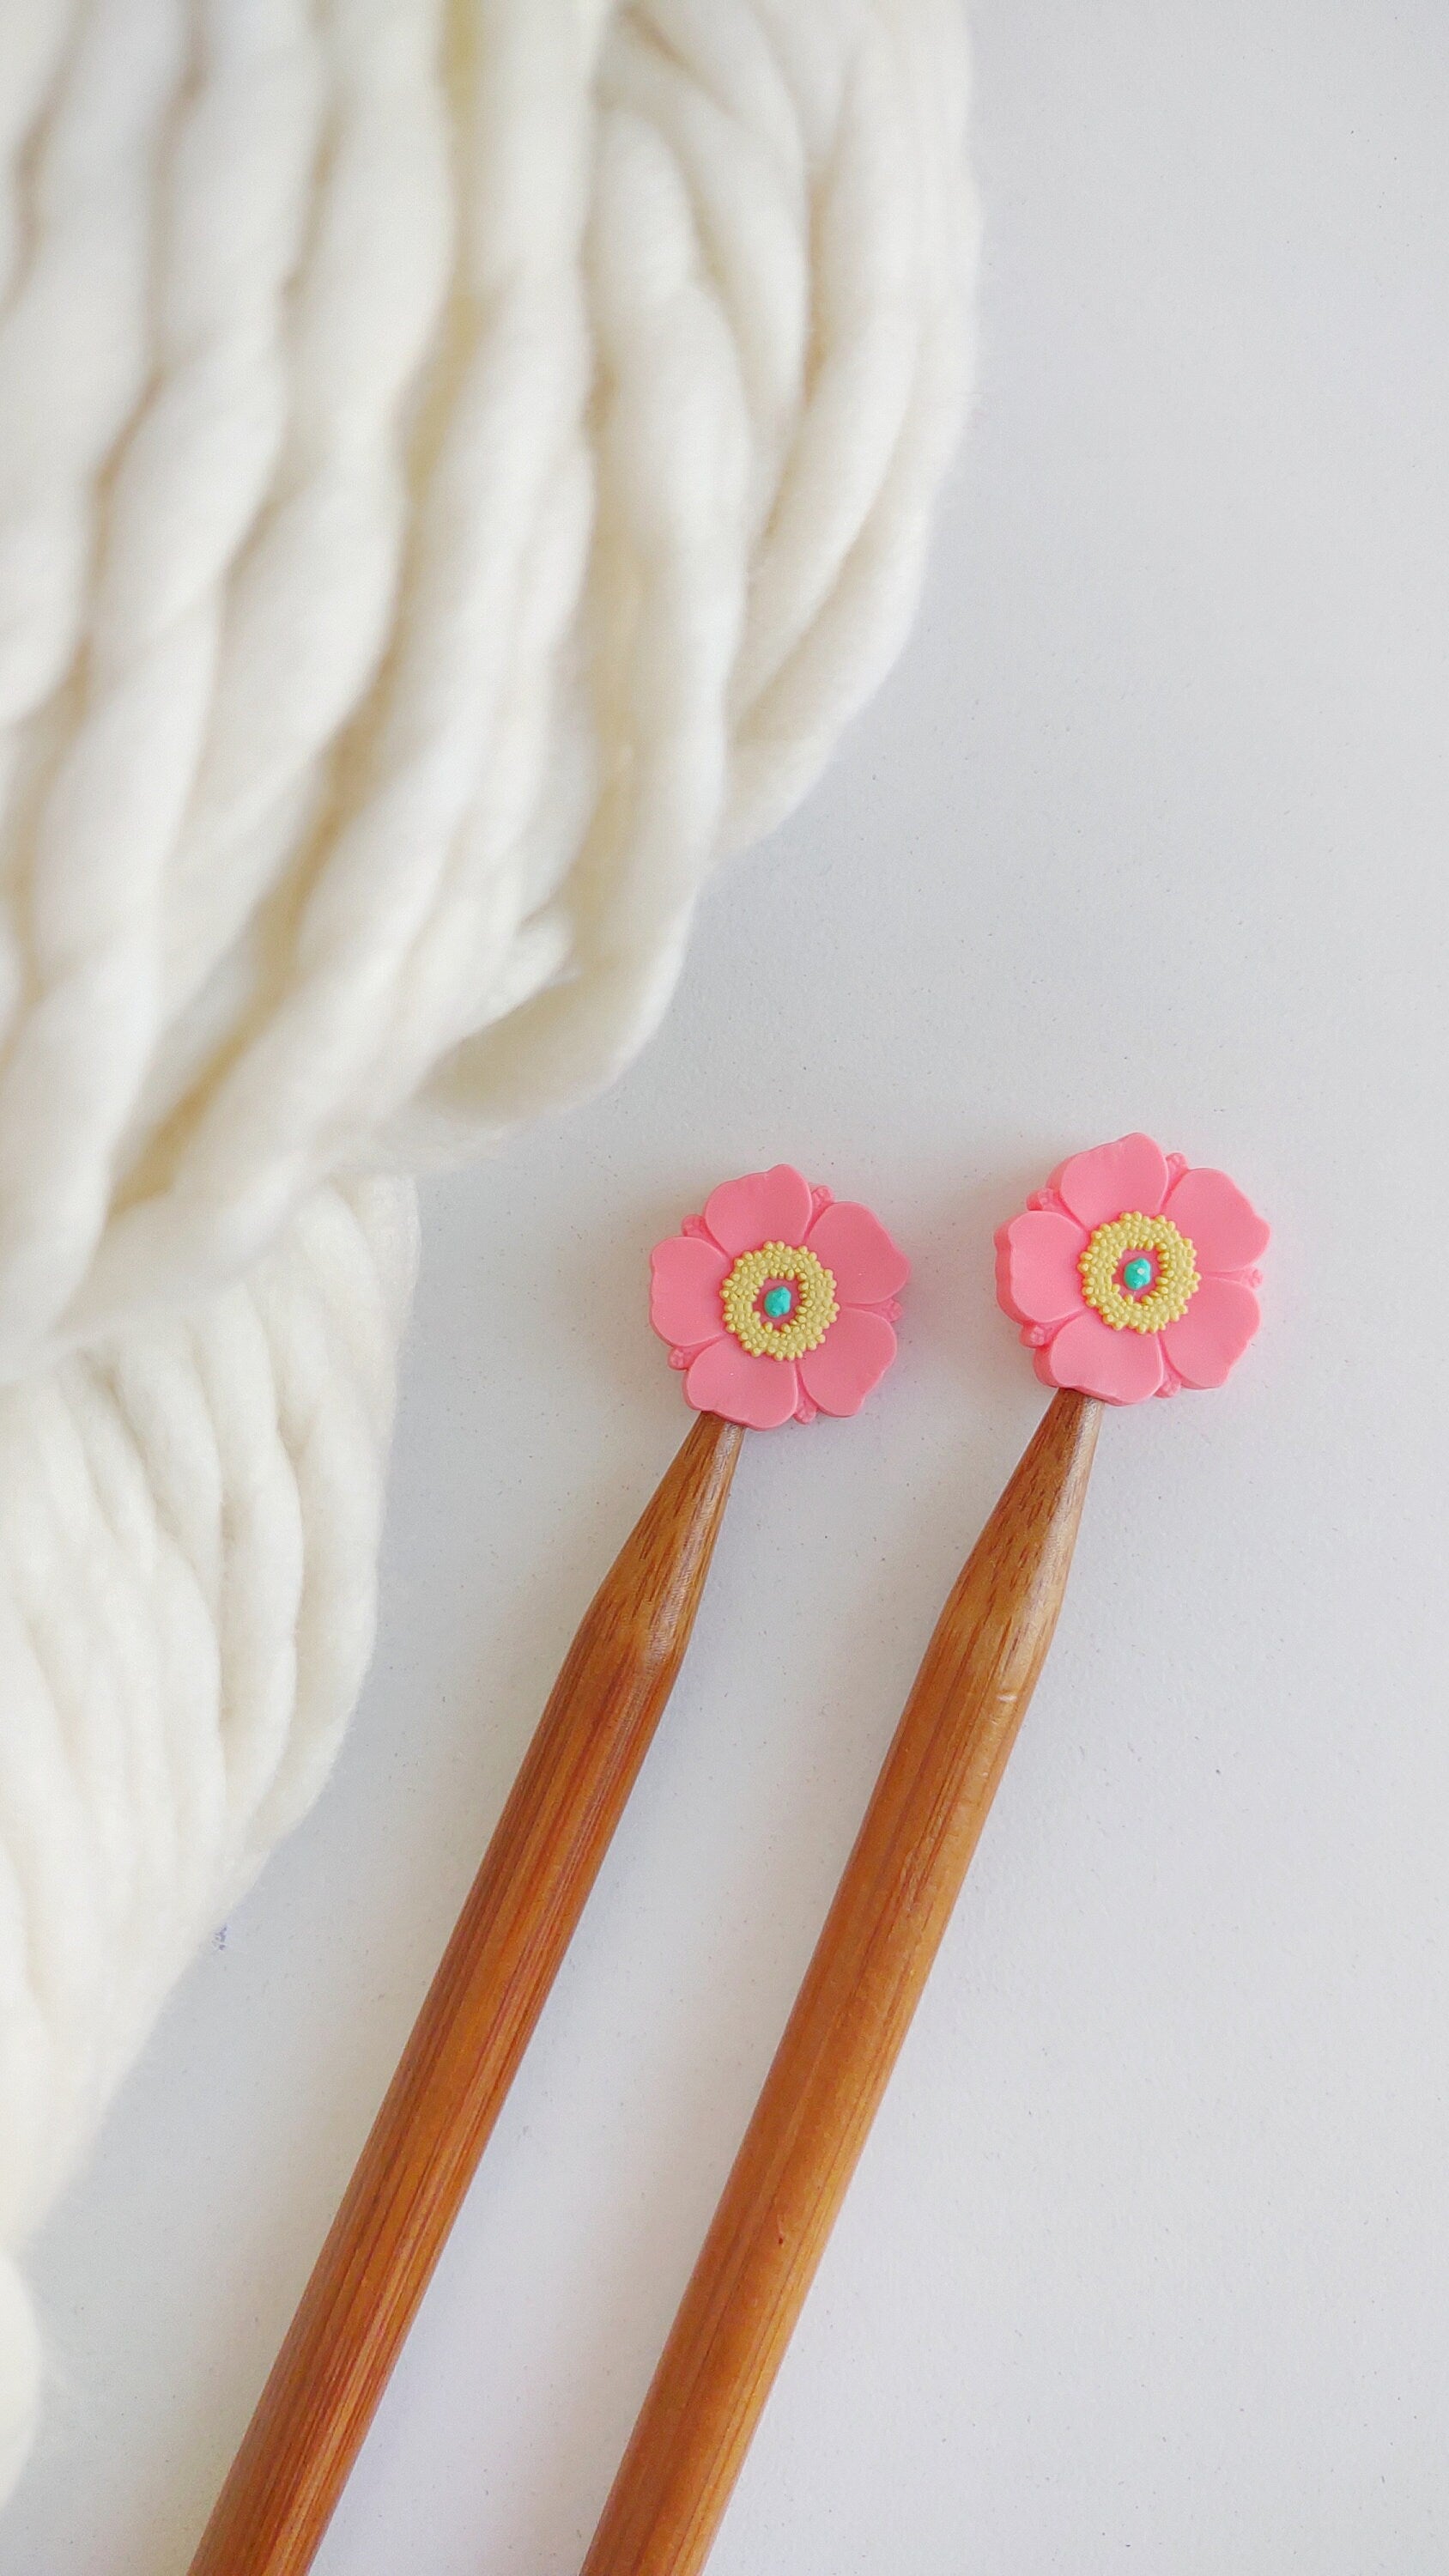 Bright Pink Poppy Flower knitting Needle Stitch Stoppers. Needle Protector. Knitting Needle Stoppers. Notions, Accessories, Supplies, Tools.